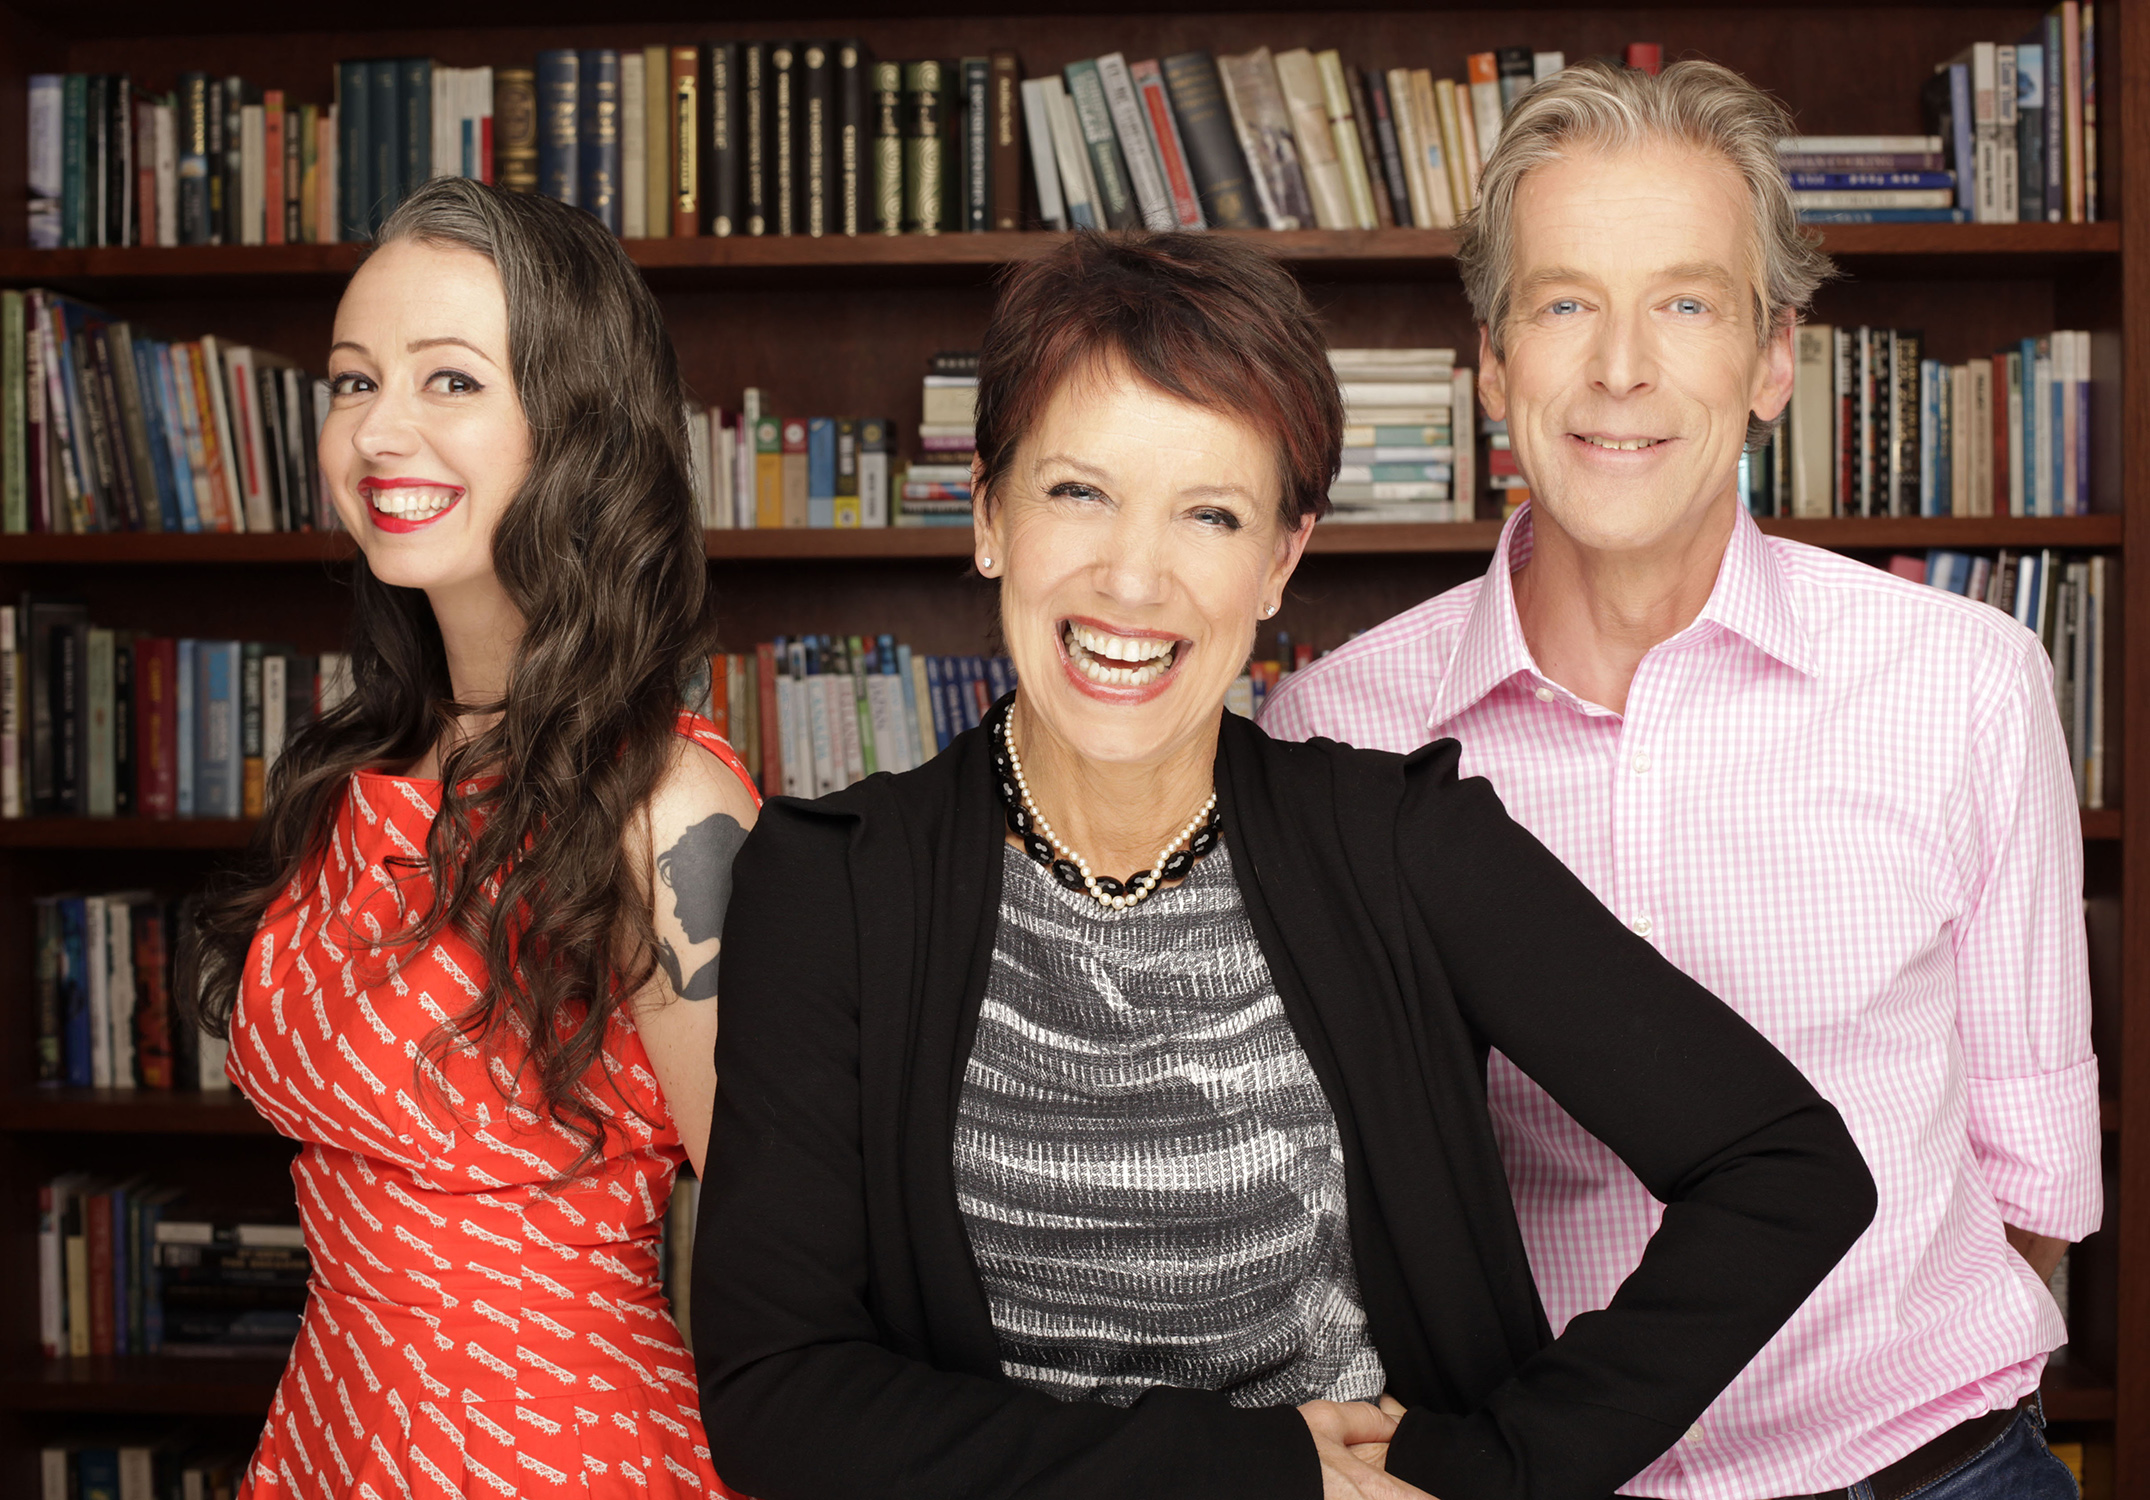   The Book Club Christmas Special  Image - ABC 